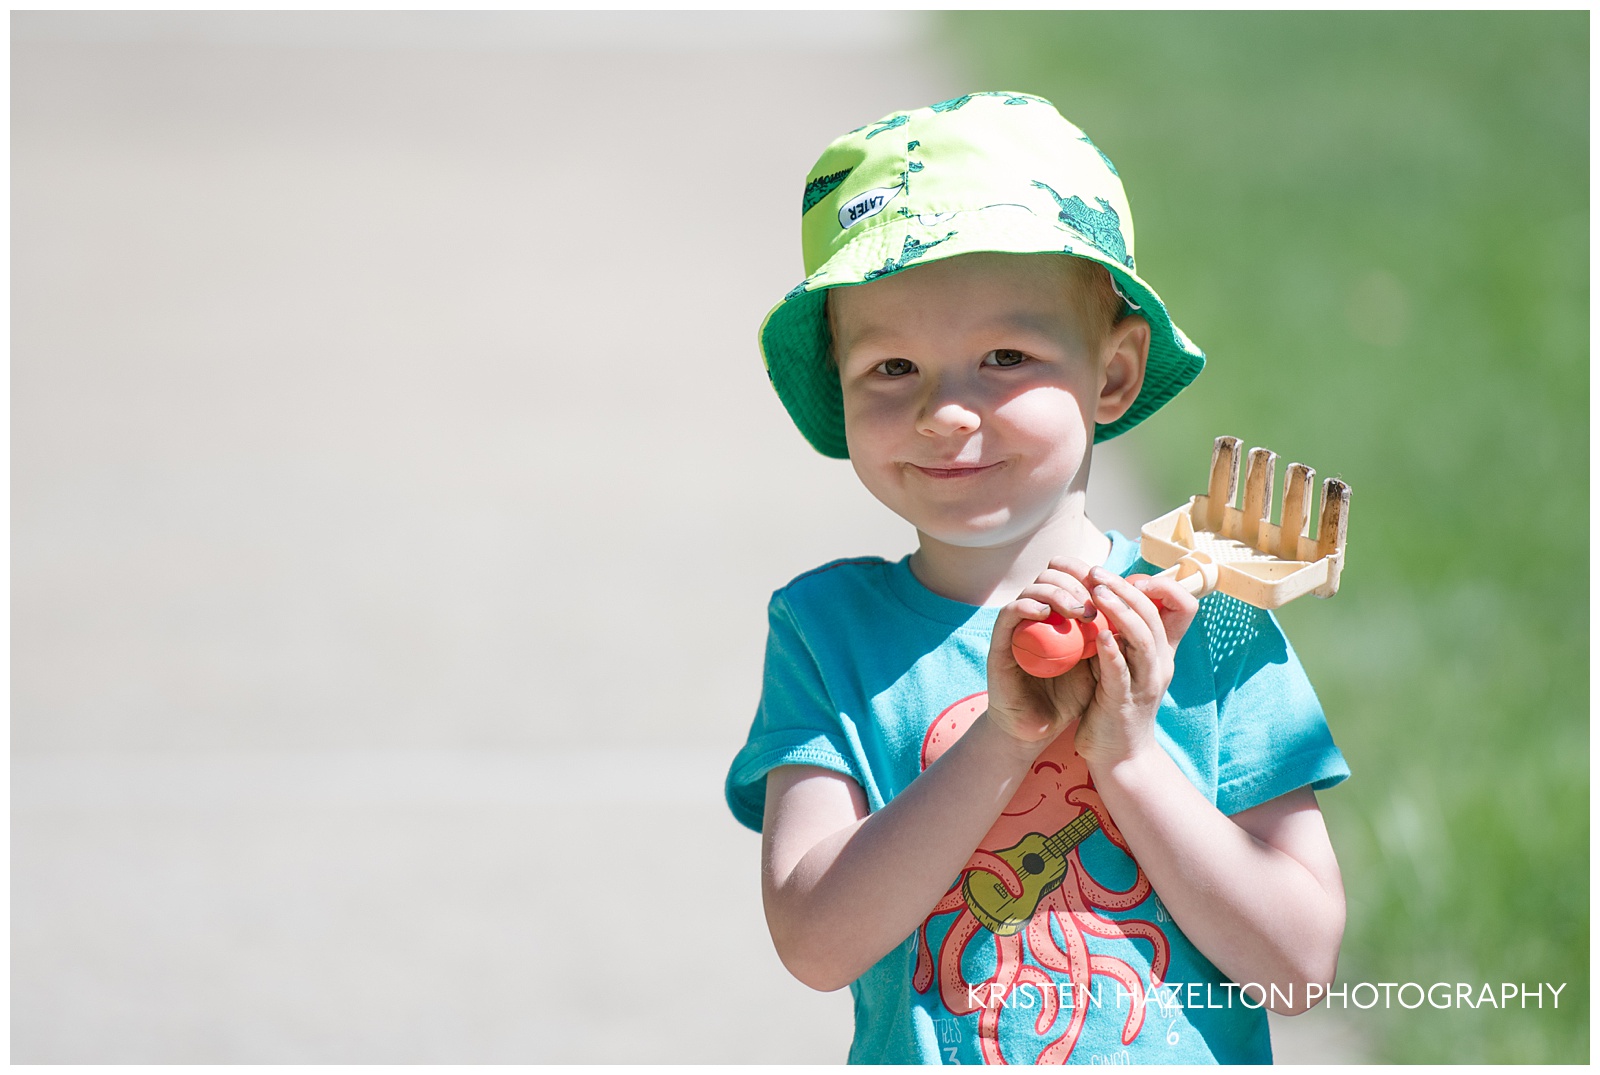 Toddler wearing a hat and holding a small rake